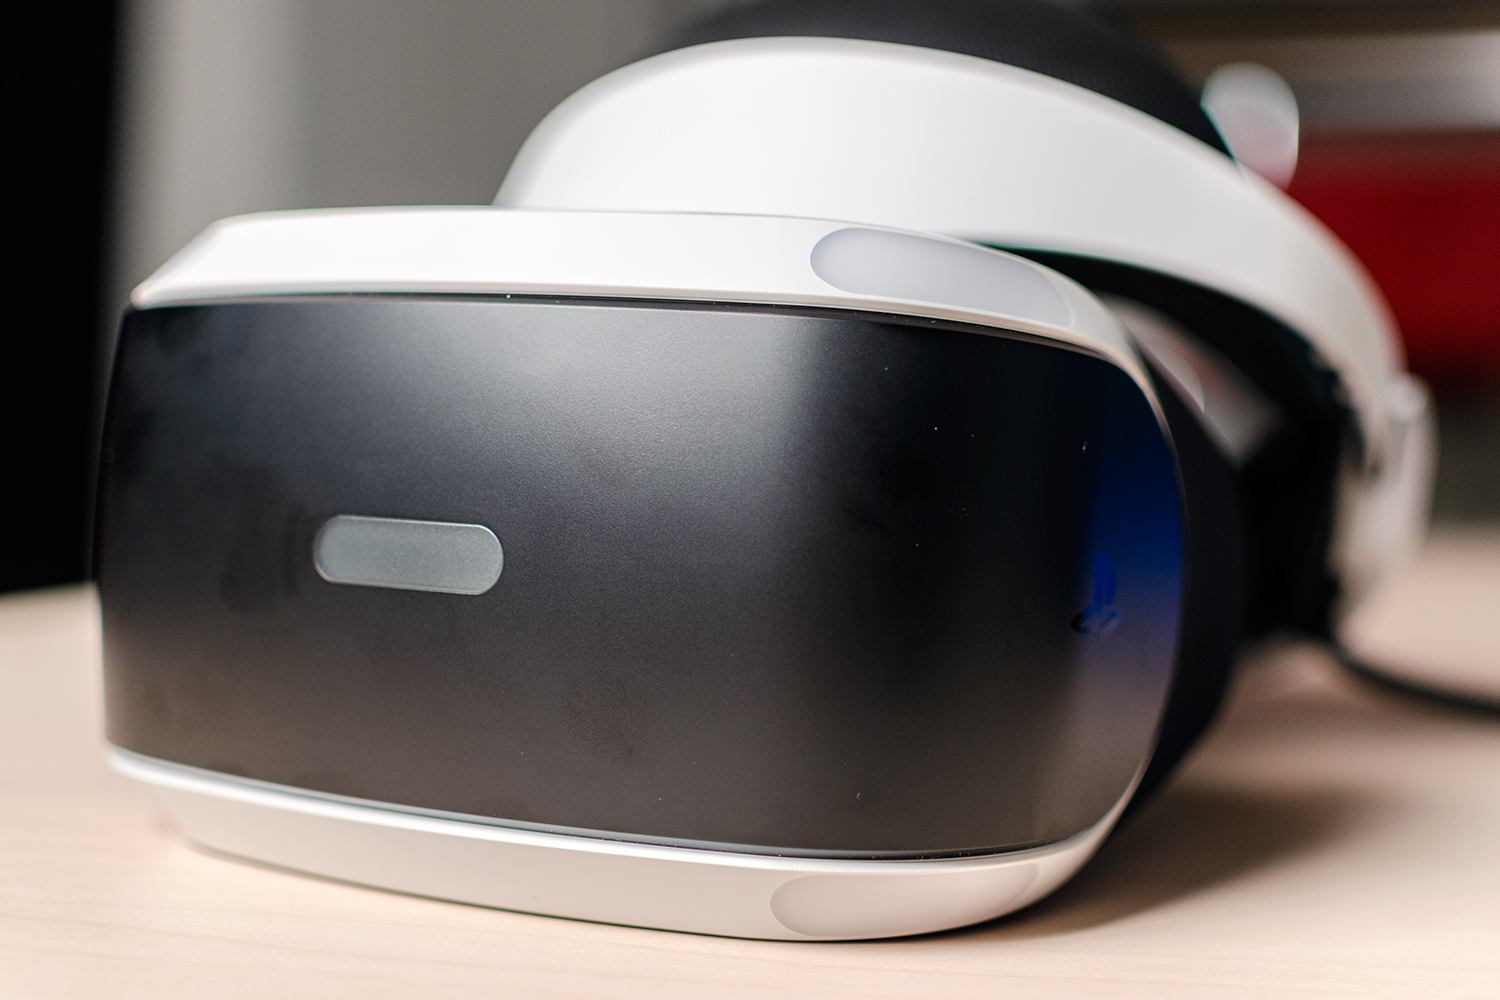 Interested in PlayStation VR? You're going to need a separate PS4